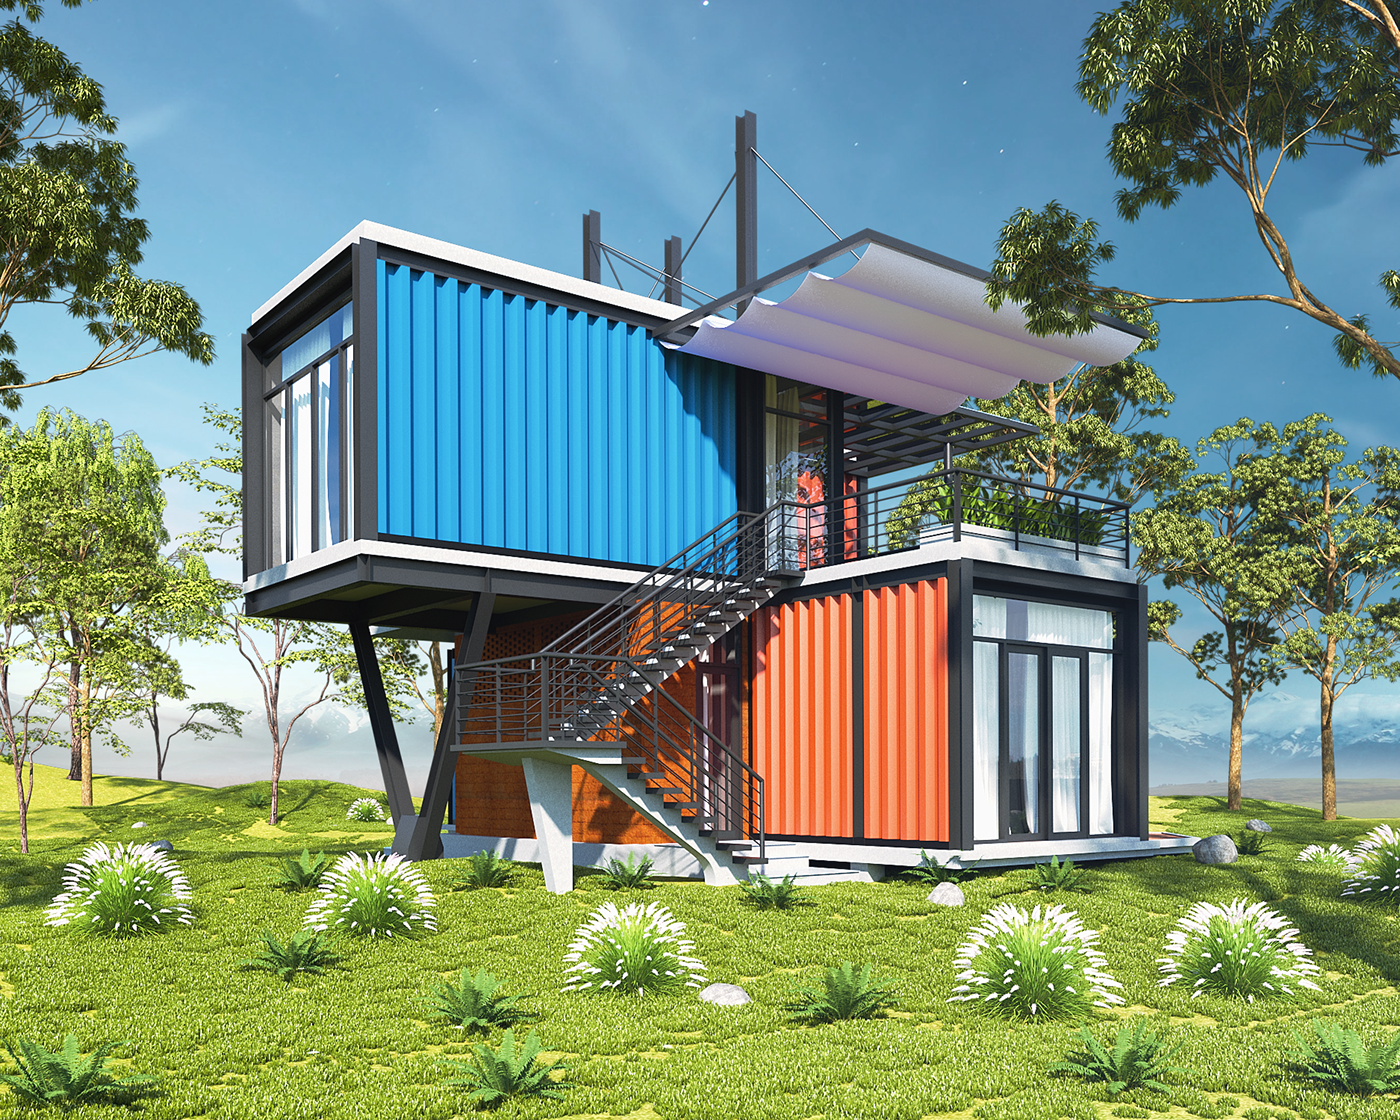 Container Design. Shipping Container Projects. Container Guest House. Container projects